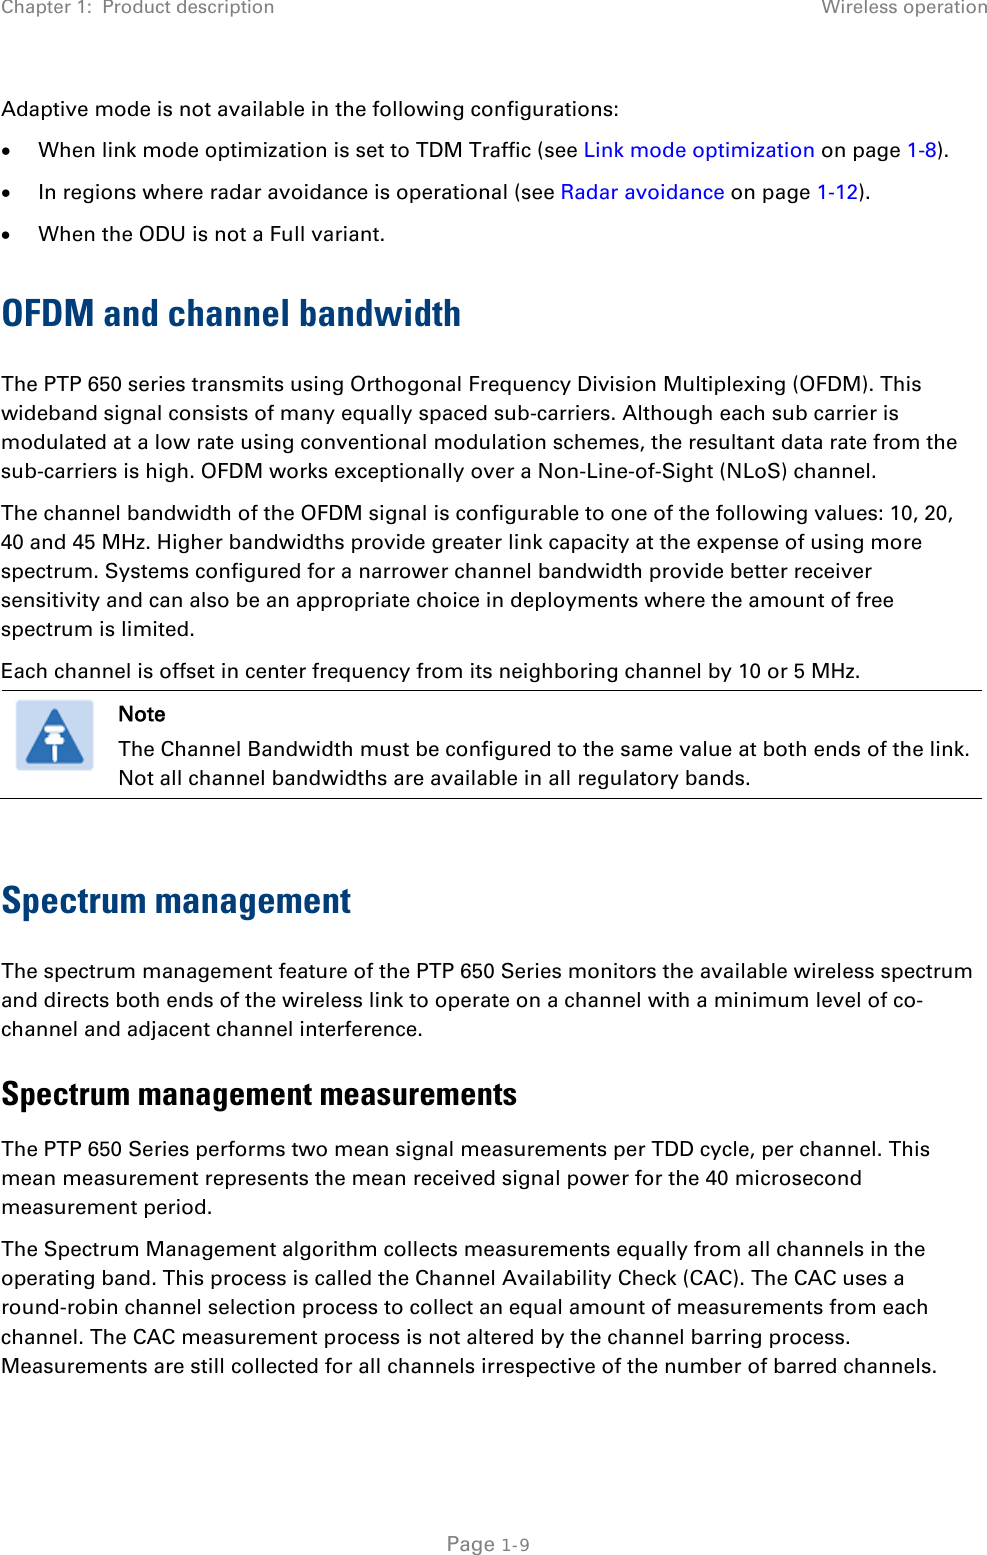 Chapter 1:  Product description Wireless operation  Adaptive mode is not available in the following configurations: • When link mode optimization is set to TDM Traffic (see Link mode optimization on page 1-8). • In regions where radar avoidance is operational (see Radar avoidance on page 1-12). • When the ODU is not a Full variant. OFDM and channel bandwidth The PTP 650 series transmits using Orthogonal Frequency Division Multiplexing (OFDM). This wideband signal consists of many equally spaced sub-carriers. Although each sub carrier is modulated at a low rate using conventional modulation schemes, the resultant data rate from the sub-carriers is high. OFDM works exceptionally over a Non-Line-of-Sight (NLoS) channel.  The channel bandwidth of the OFDM signal is configurable to one of the following values: 10, 20, 40 and 45 MHz. Higher bandwidths provide greater link capacity at the expense of using more spectrum. Systems configured for a narrower channel bandwidth provide better receiver sensitivity and can also be an appropriate choice in deployments where the amount of free spectrum is limited. Each channel is offset in center frequency from its neighboring channel by 10 or 5 MHz.   Note The Channel Bandwidth must be configured to the same value at both ends of the link. Not all channel bandwidths are available in all regulatory bands.  Spectrum management The spectrum management feature of the PTP 650 Series monitors the available wireless spectrum and directs both ends of the wireless link to operate on a channel with a minimum level of co-channel and adjacent channel interference. Spectrum management measurements The PTP 650 Series performs two mean signal measurements per TDD cycle, per channel. This mean measurement represents the mean received signal power for the 40 microsecond measurement period. The Spectrum Management algorithm collects measurements equally from all channels in the operating band. This process is called the Channel Availability Check (CAC). The CAC uses a round-robin channel selection process to collect an equal amount of measurements from each channel. The CAC measurement process is not altered by the channel barring process. Measurements are still collected for all channels irrespective of the number of barred channels.  Page 1-9 